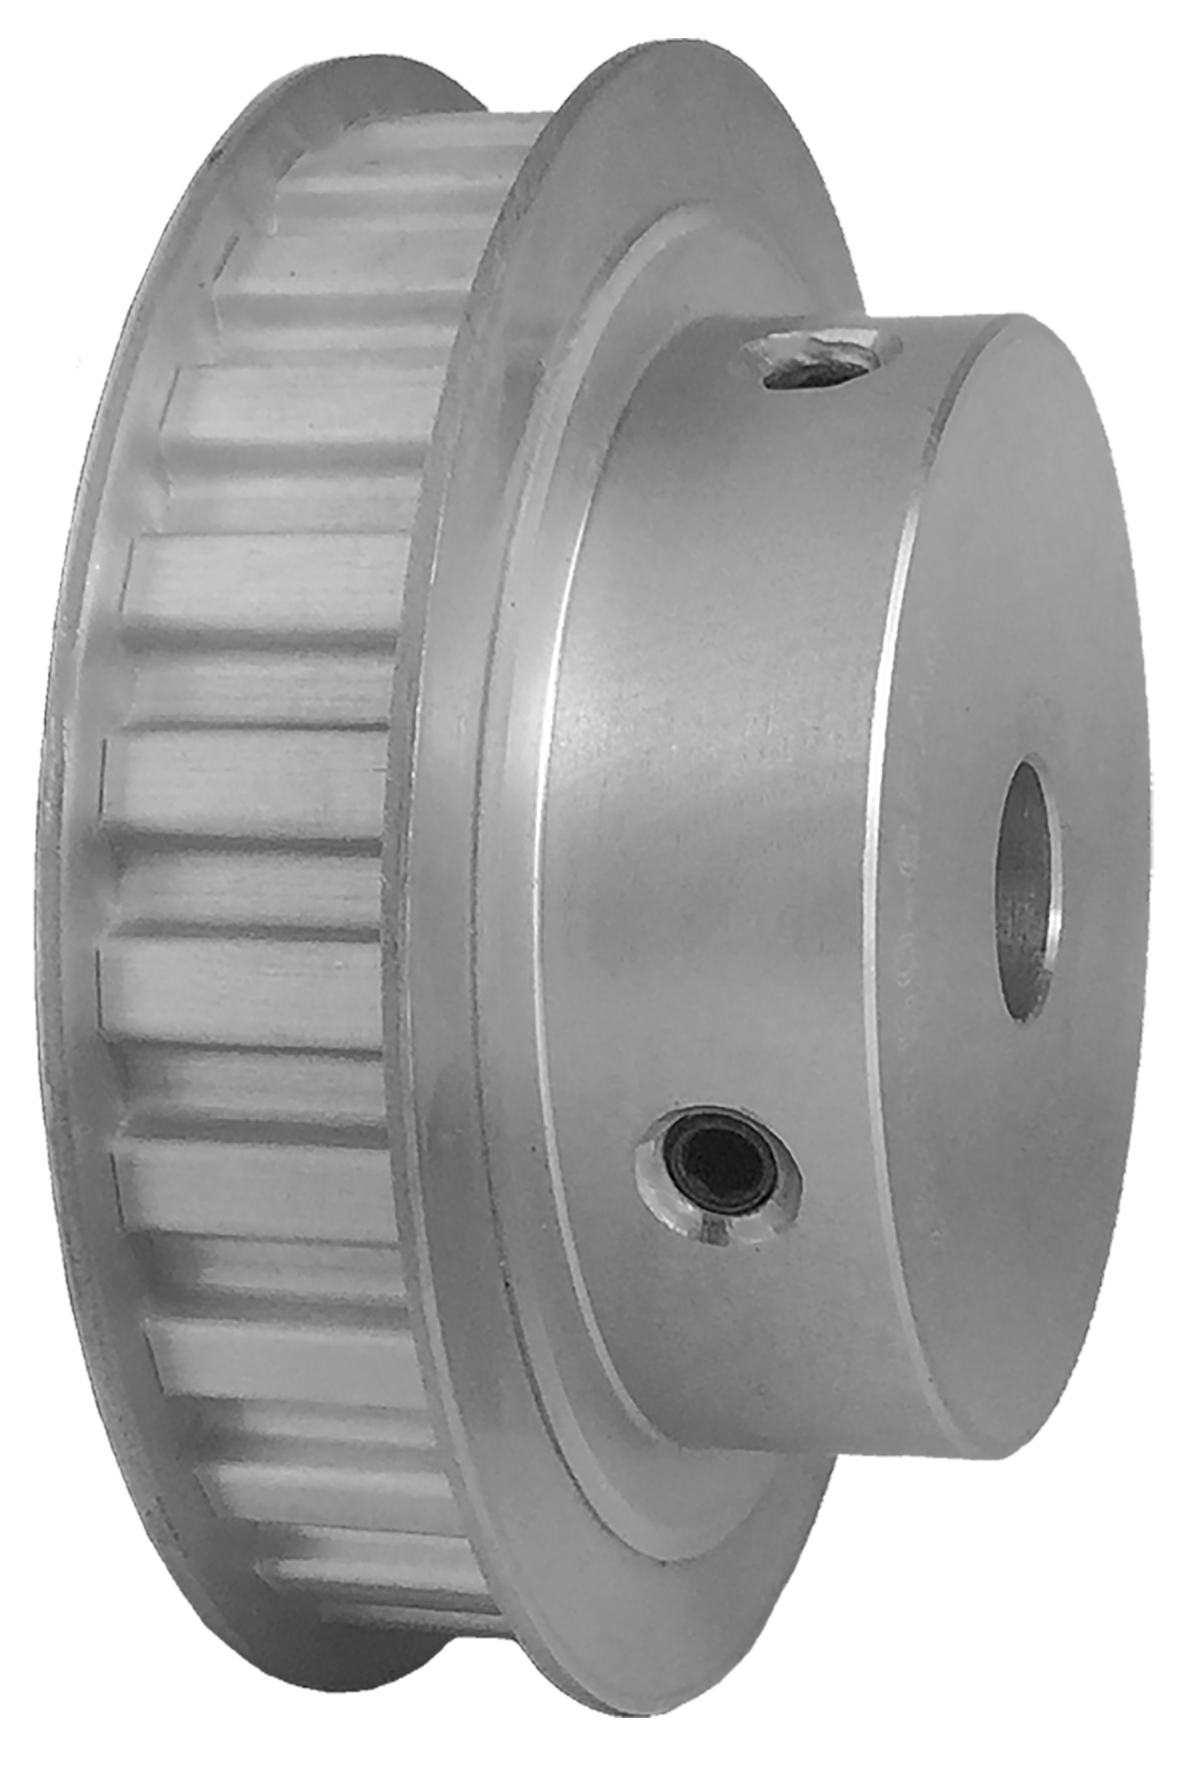 26L050-6FA6 - Aluminum Imperial Pitch Pulleys